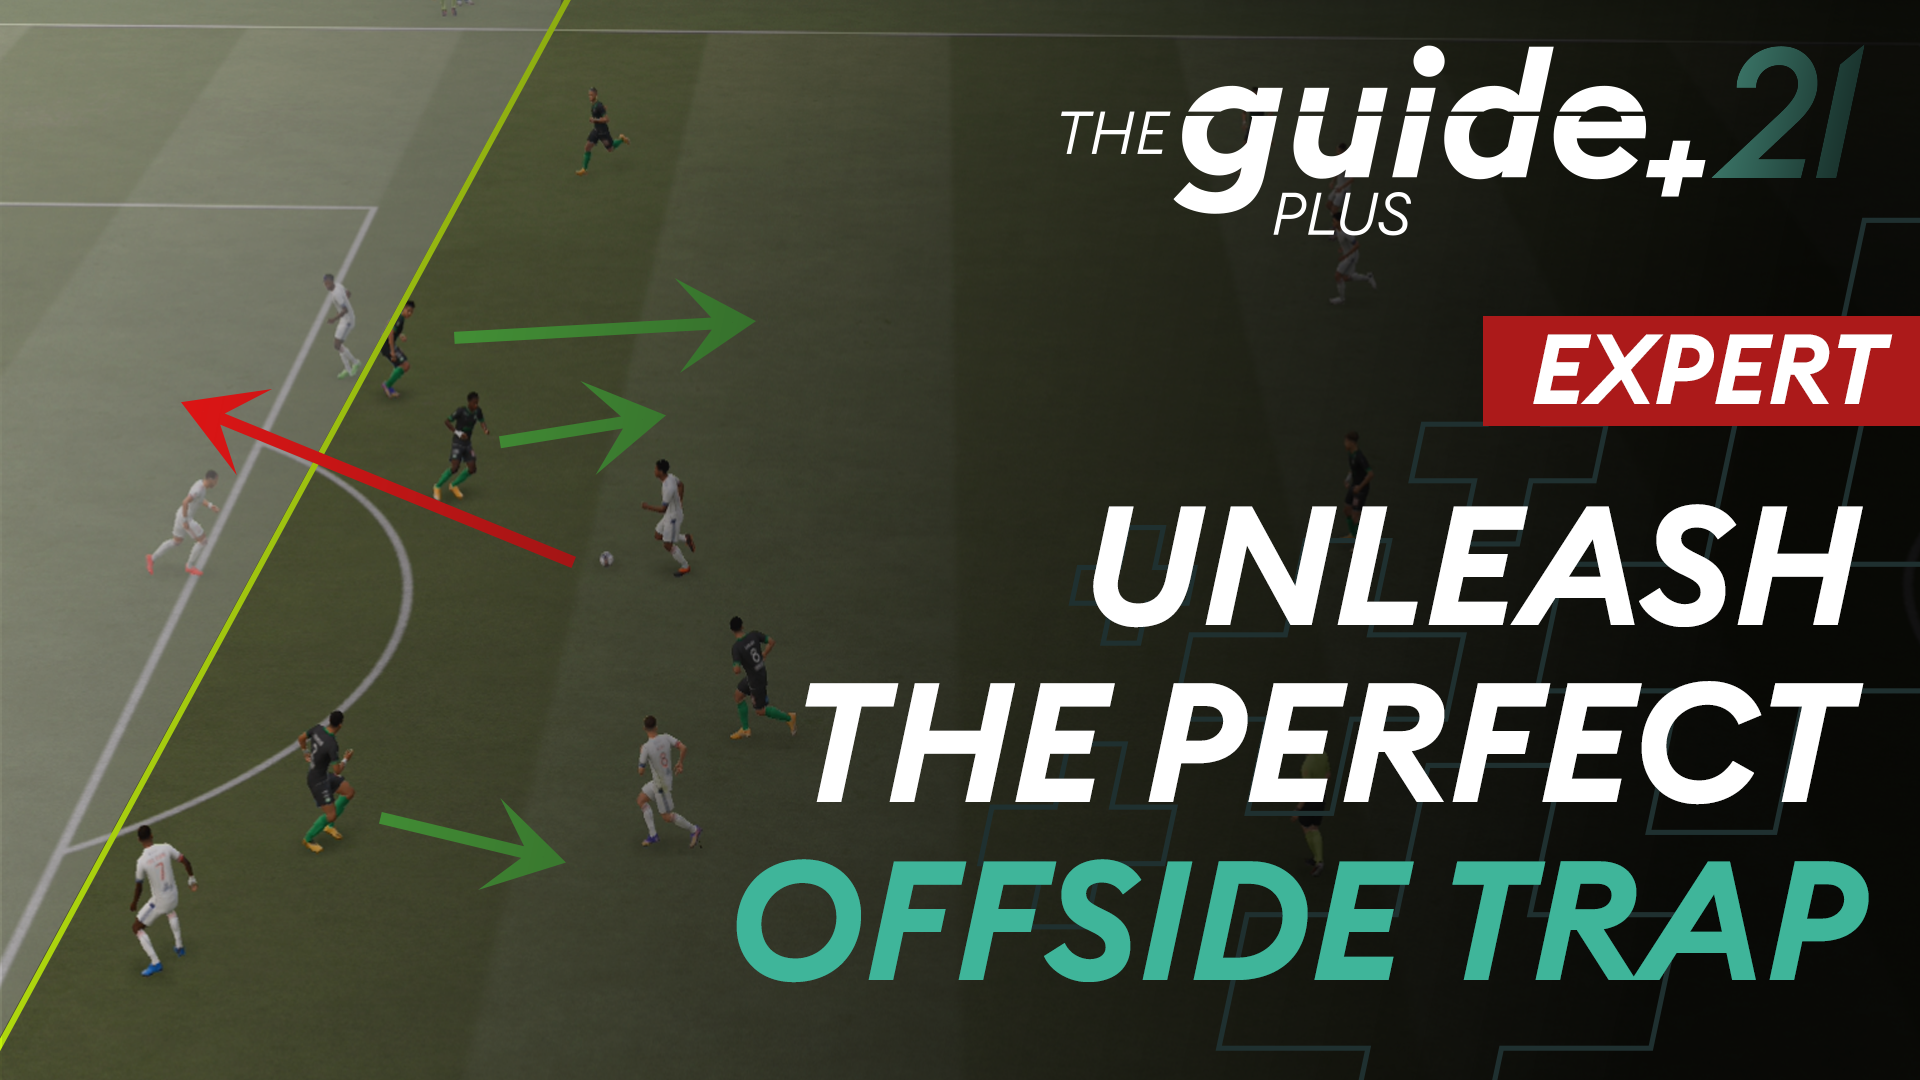 Offside Trap – A powerful tool to work with in your defense!